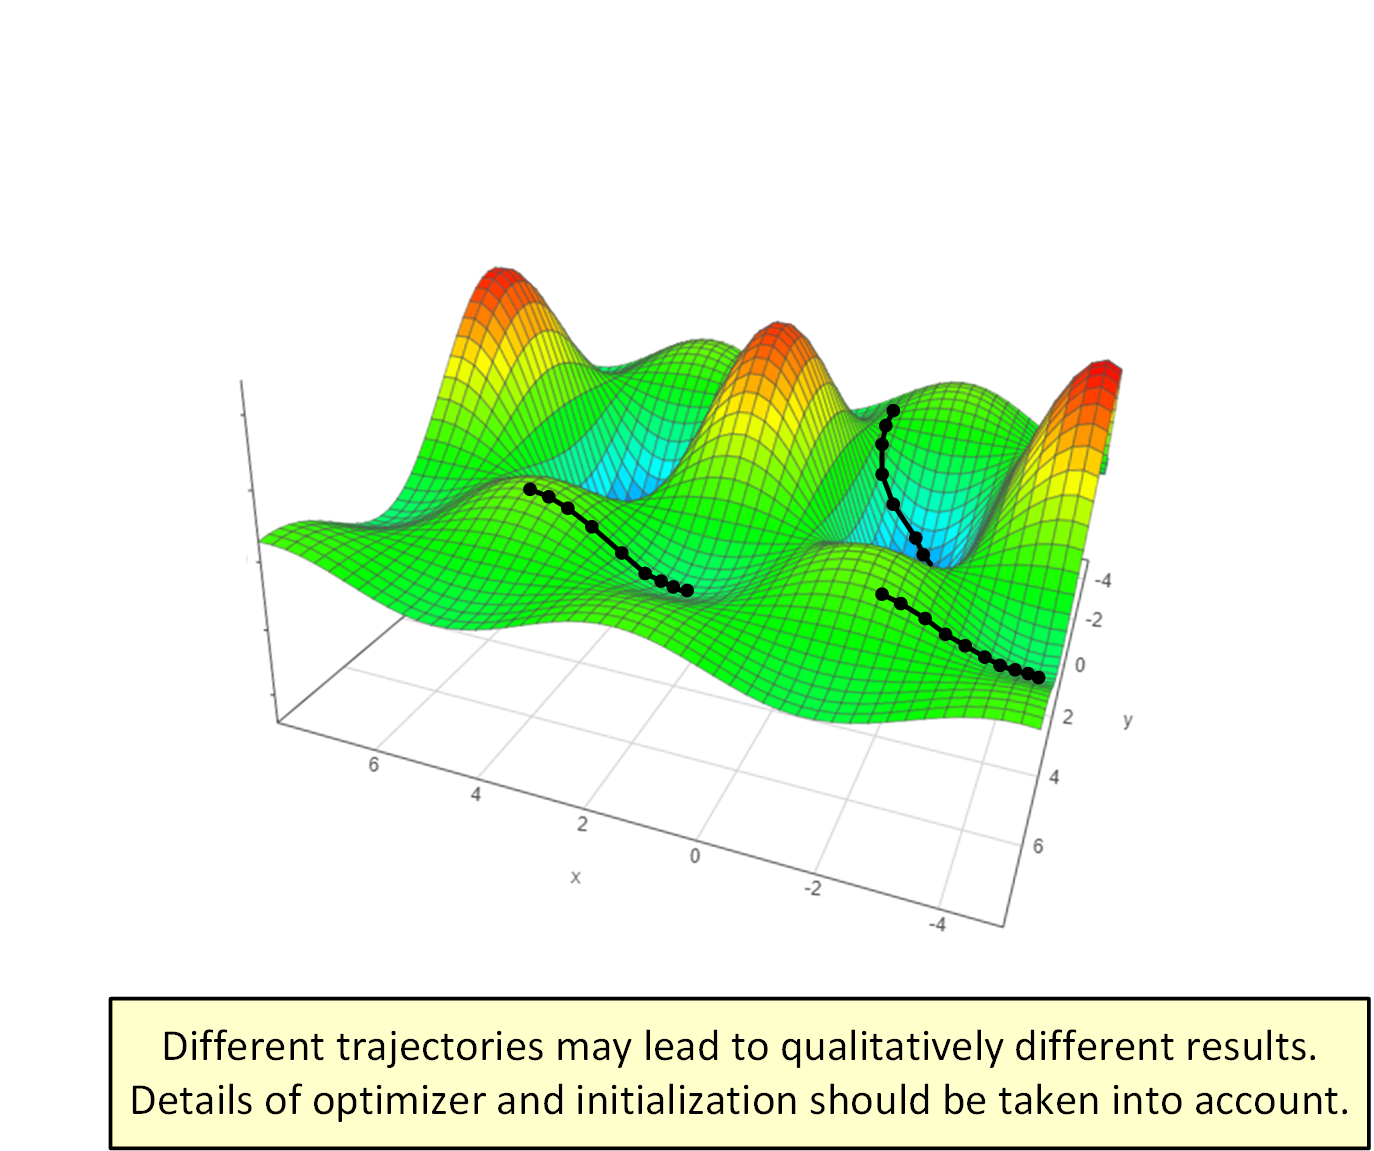 Different trajectories lead to qualitatively different results